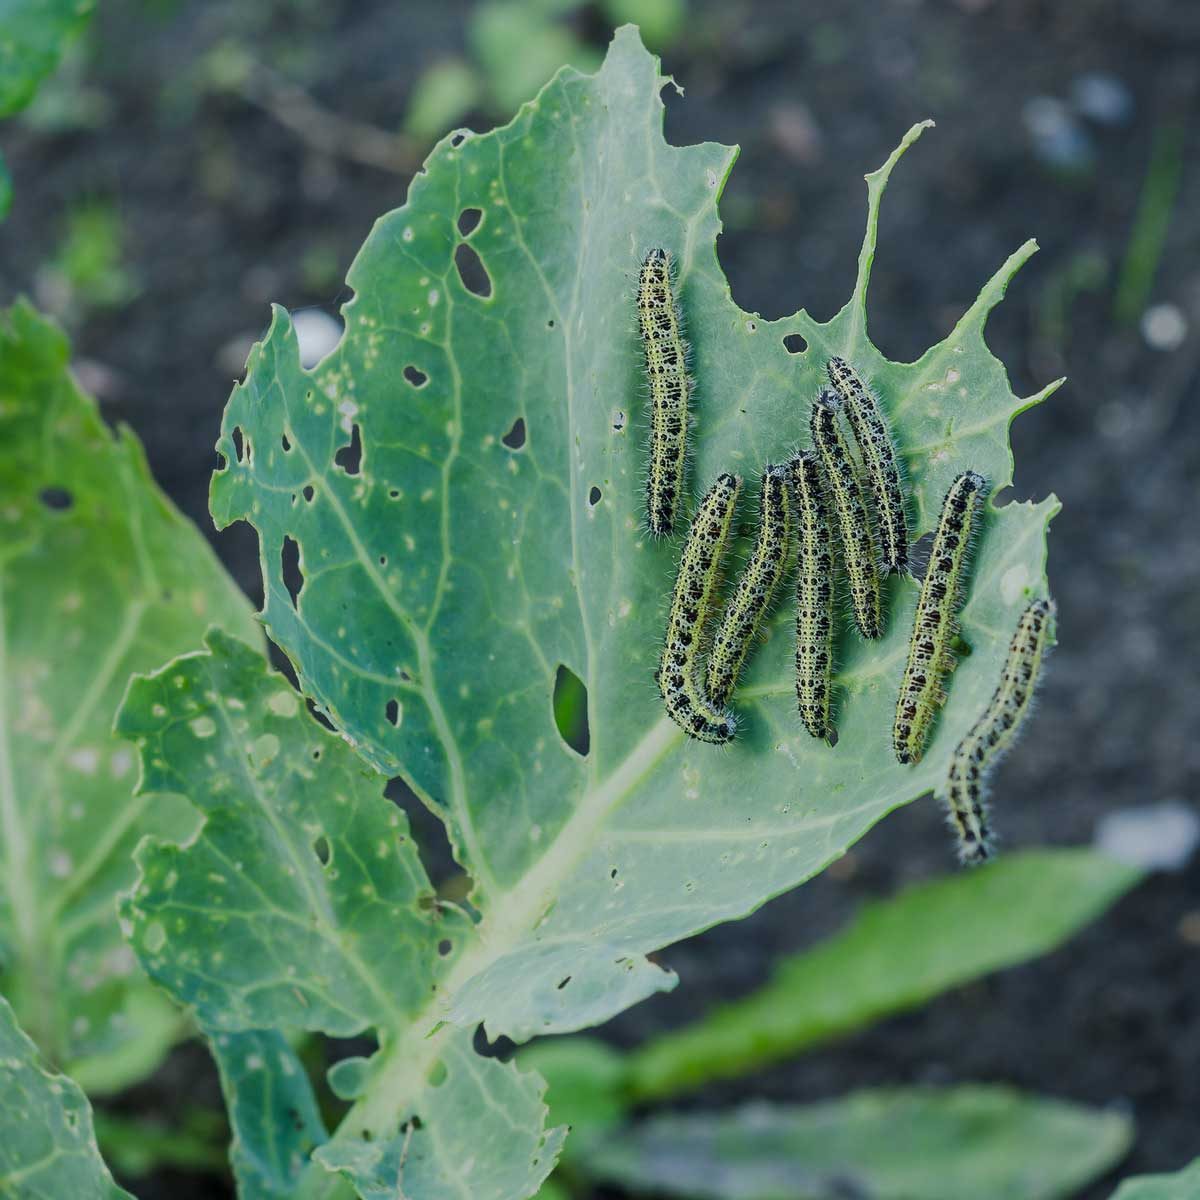 Why Are White Caterpillars So Bad For Your Garden?